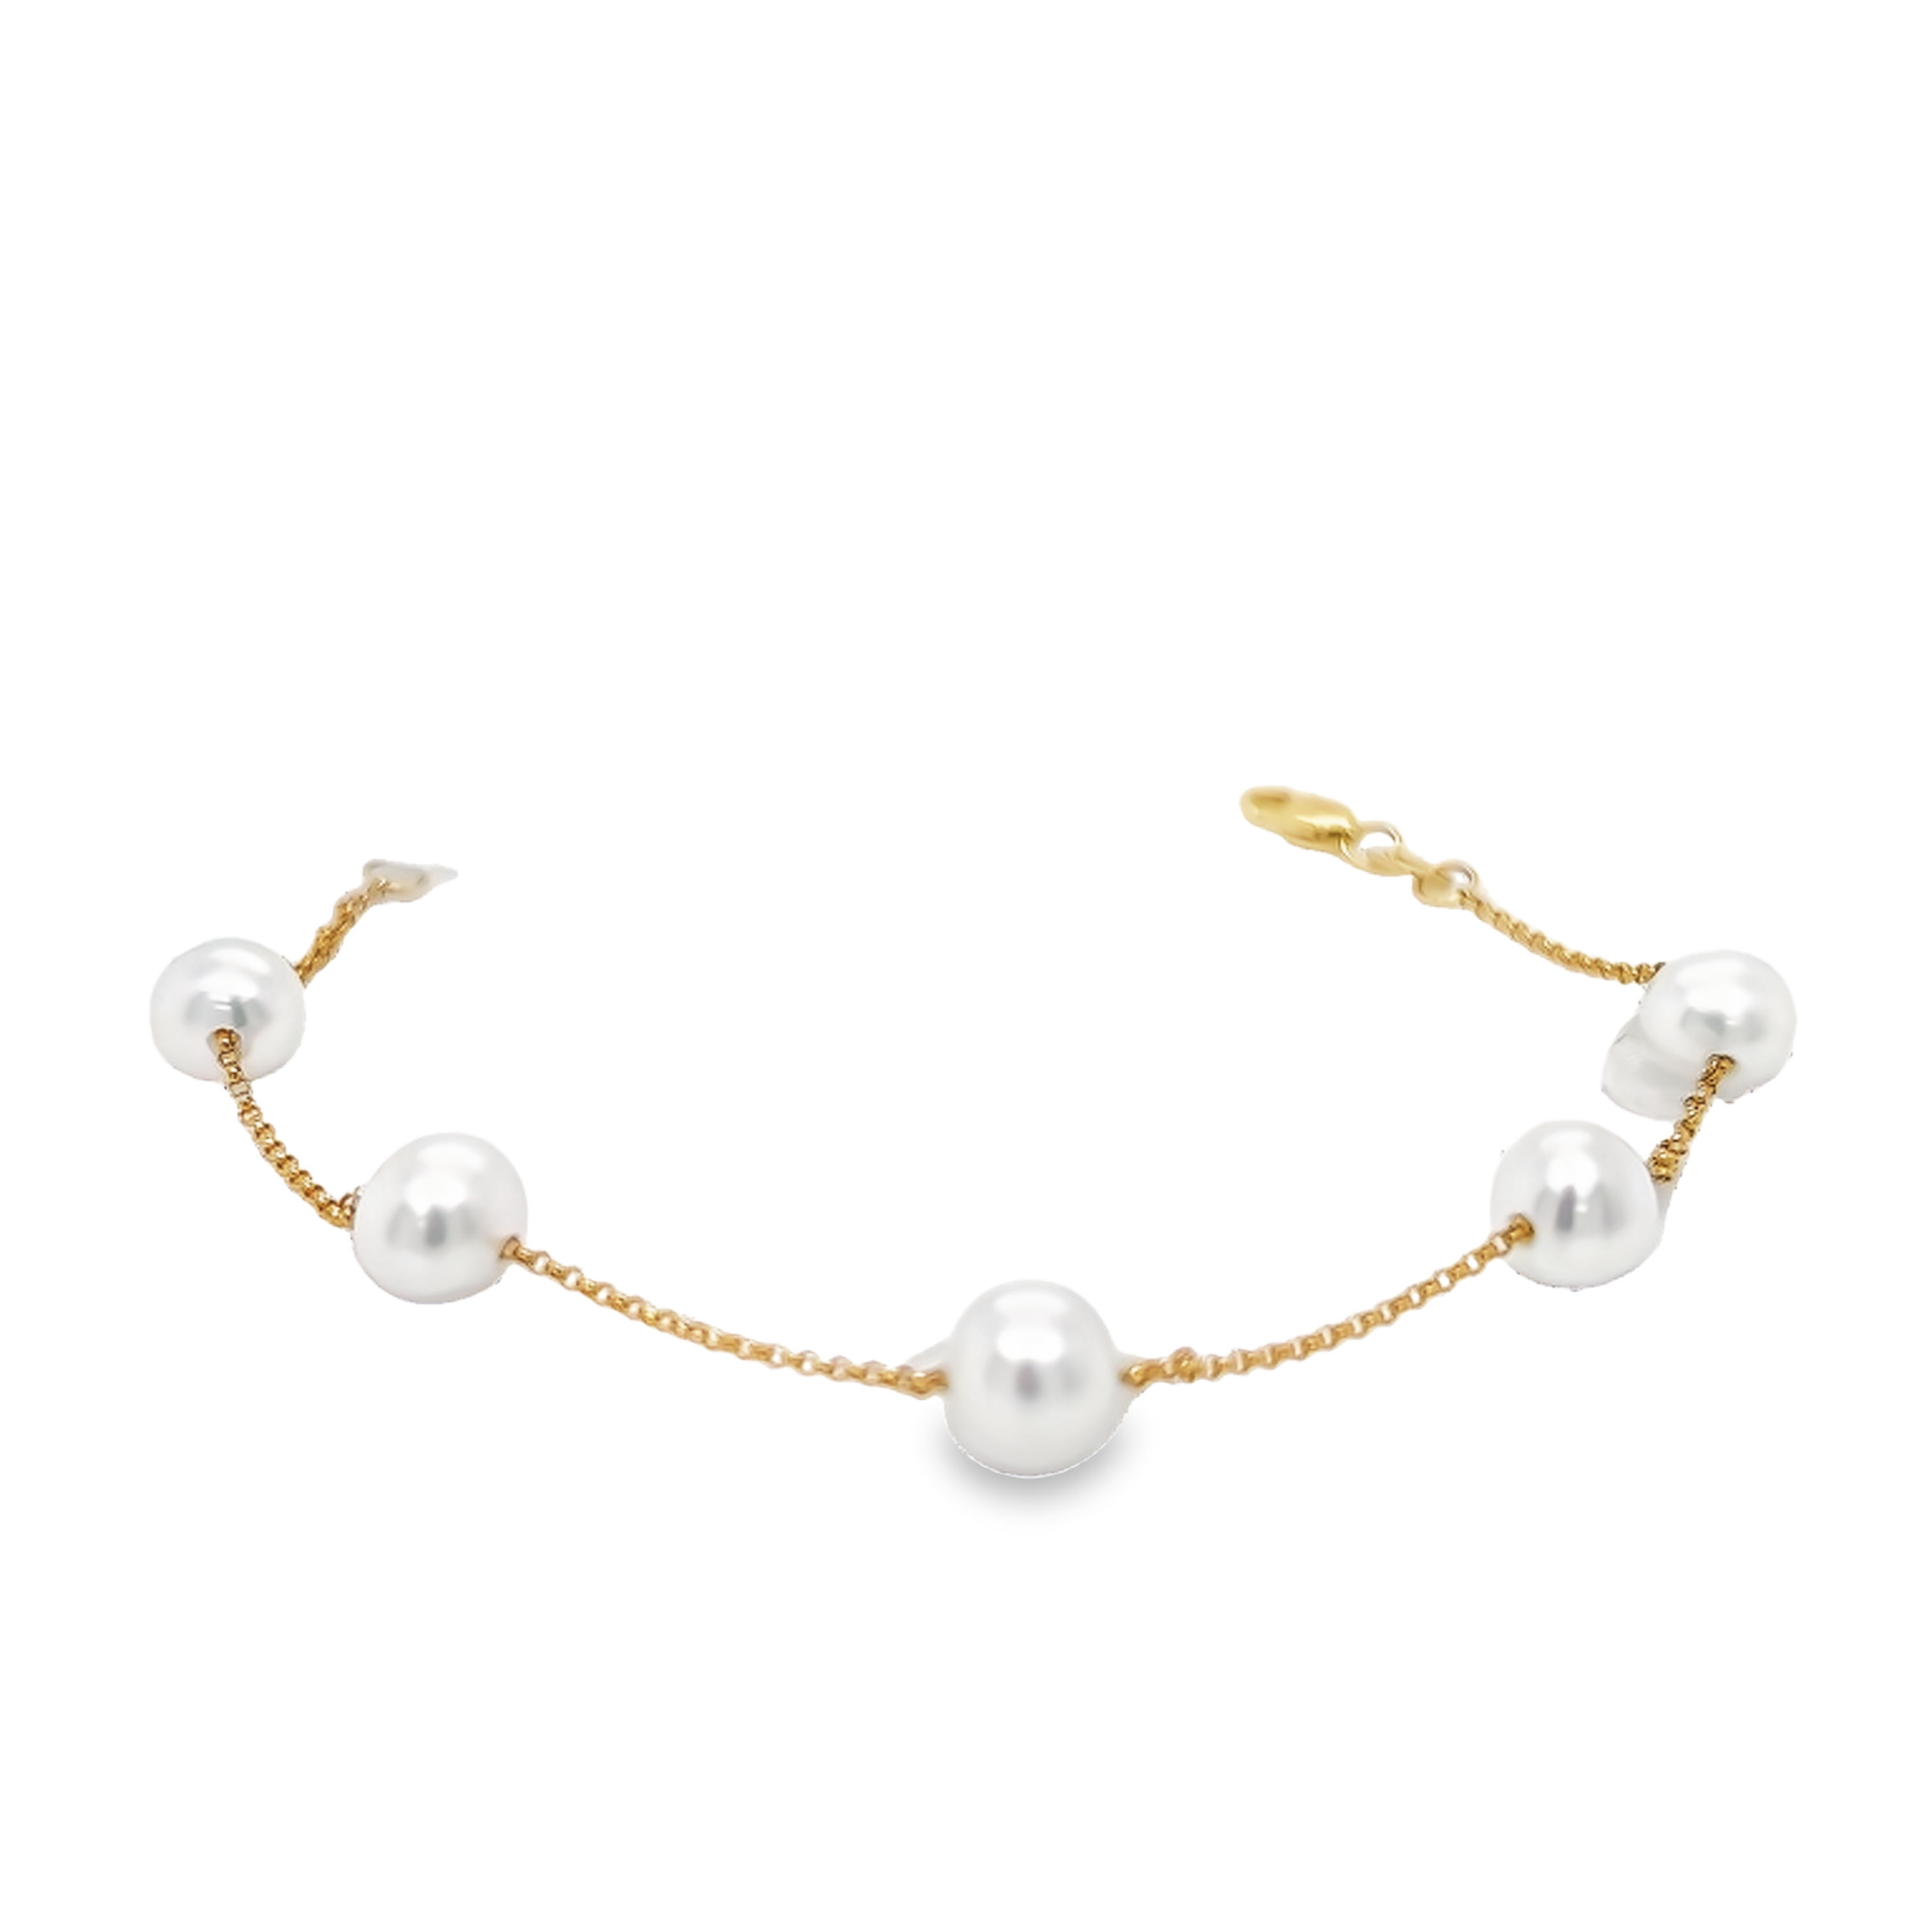 14 karat yellow gold tincup bracelet with 5=6.00-7.00mm fresh water Pearls